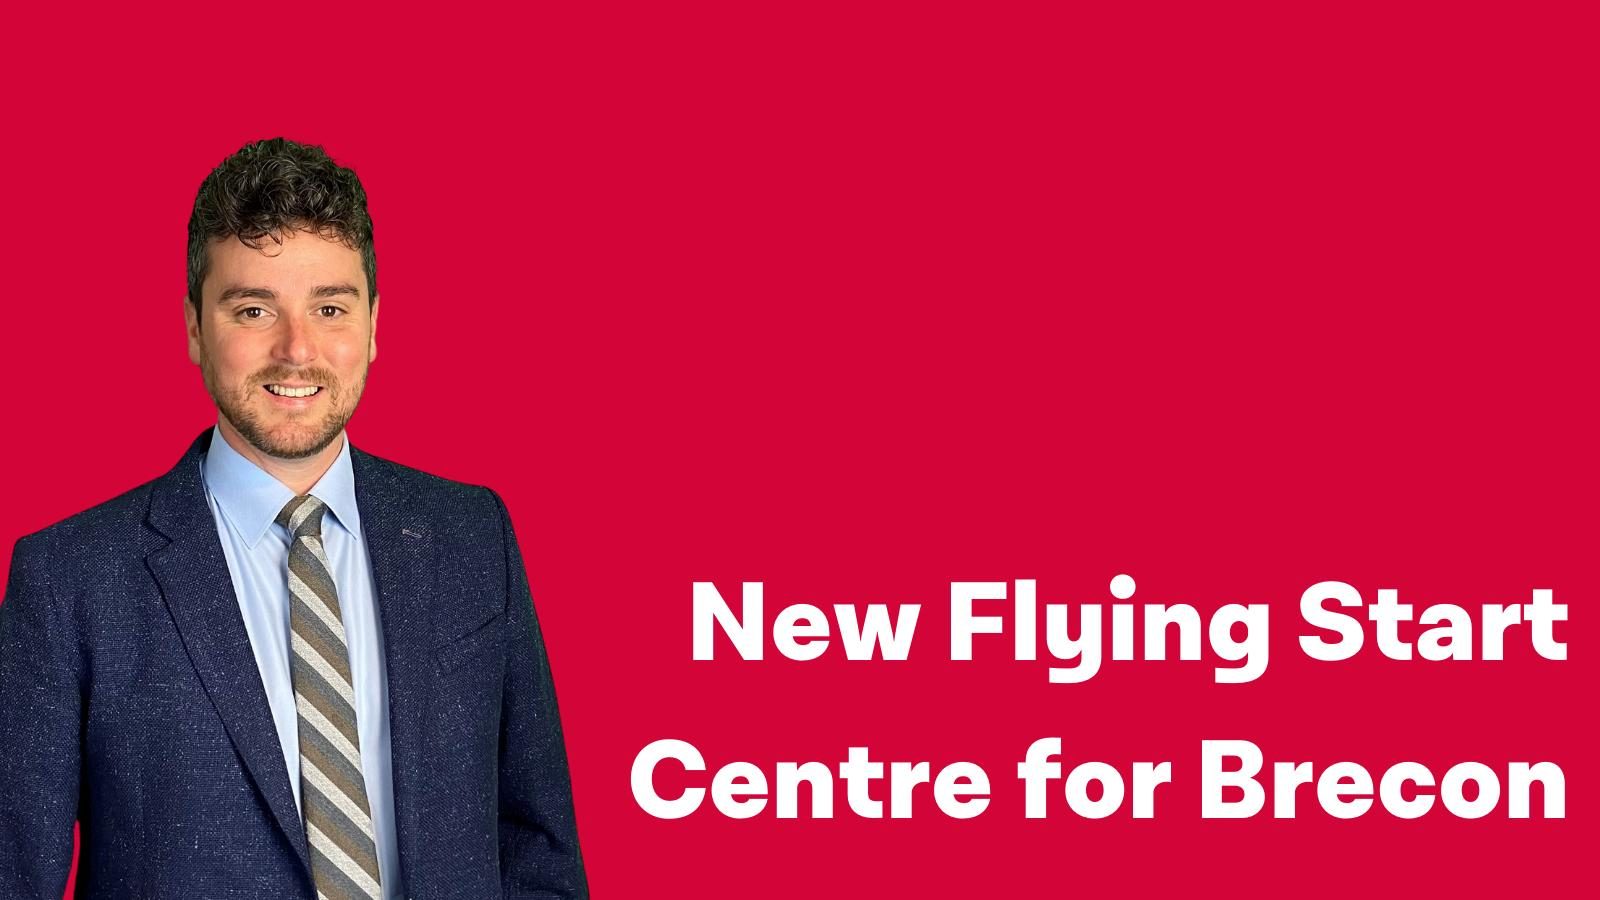 A new Flying Start Centre is planned for Brecon.